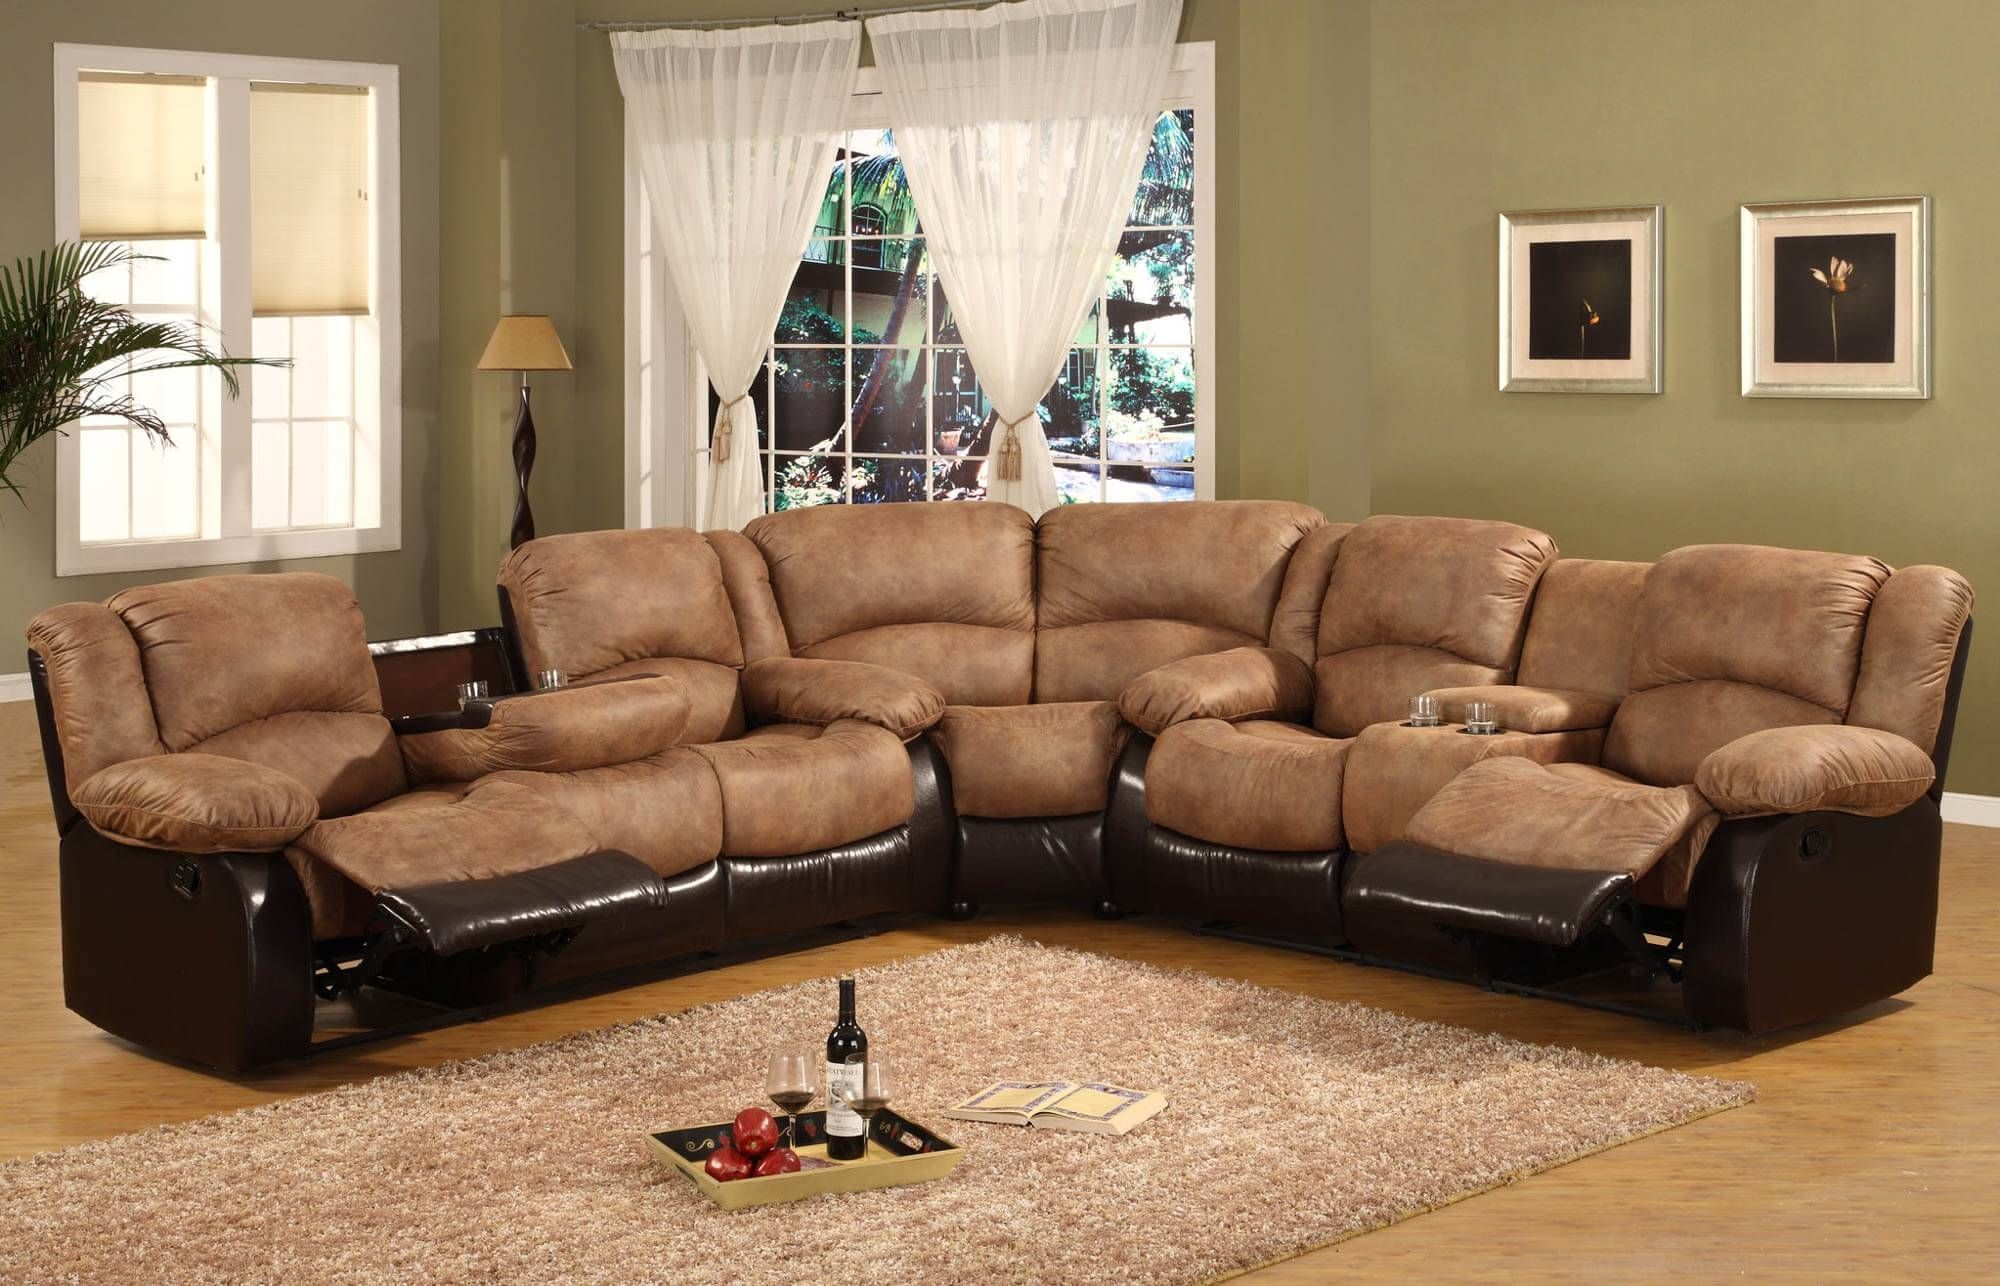 Camel Colored Sofa | Sofa Gallery | Kengire Intended For Camel Sectional Sofa (View 12 of 30)